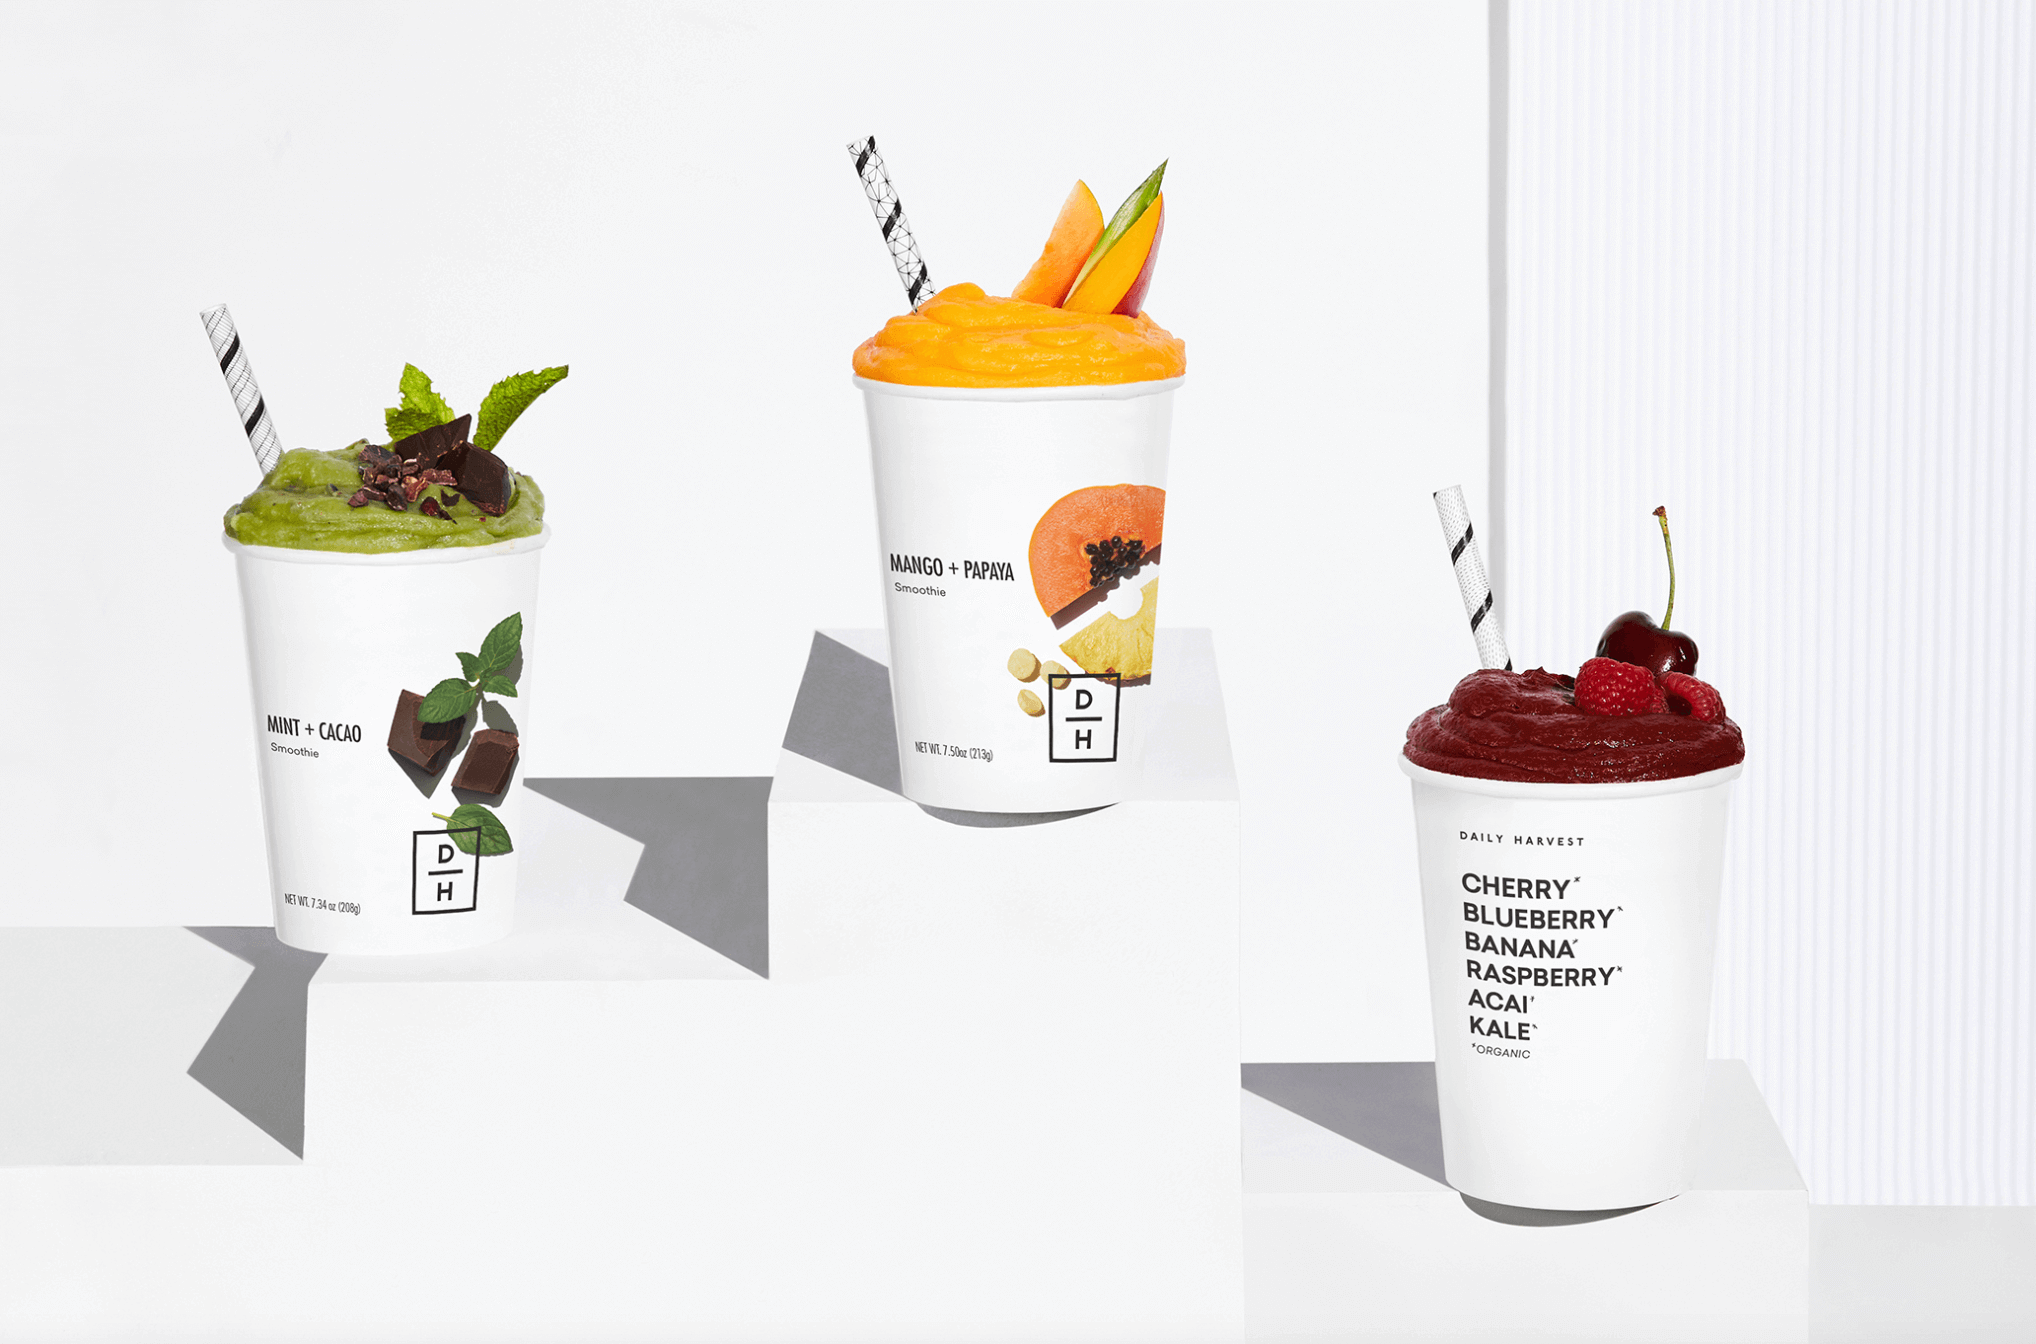 Smoothie Mixes - Smoothie Subscription Delivery